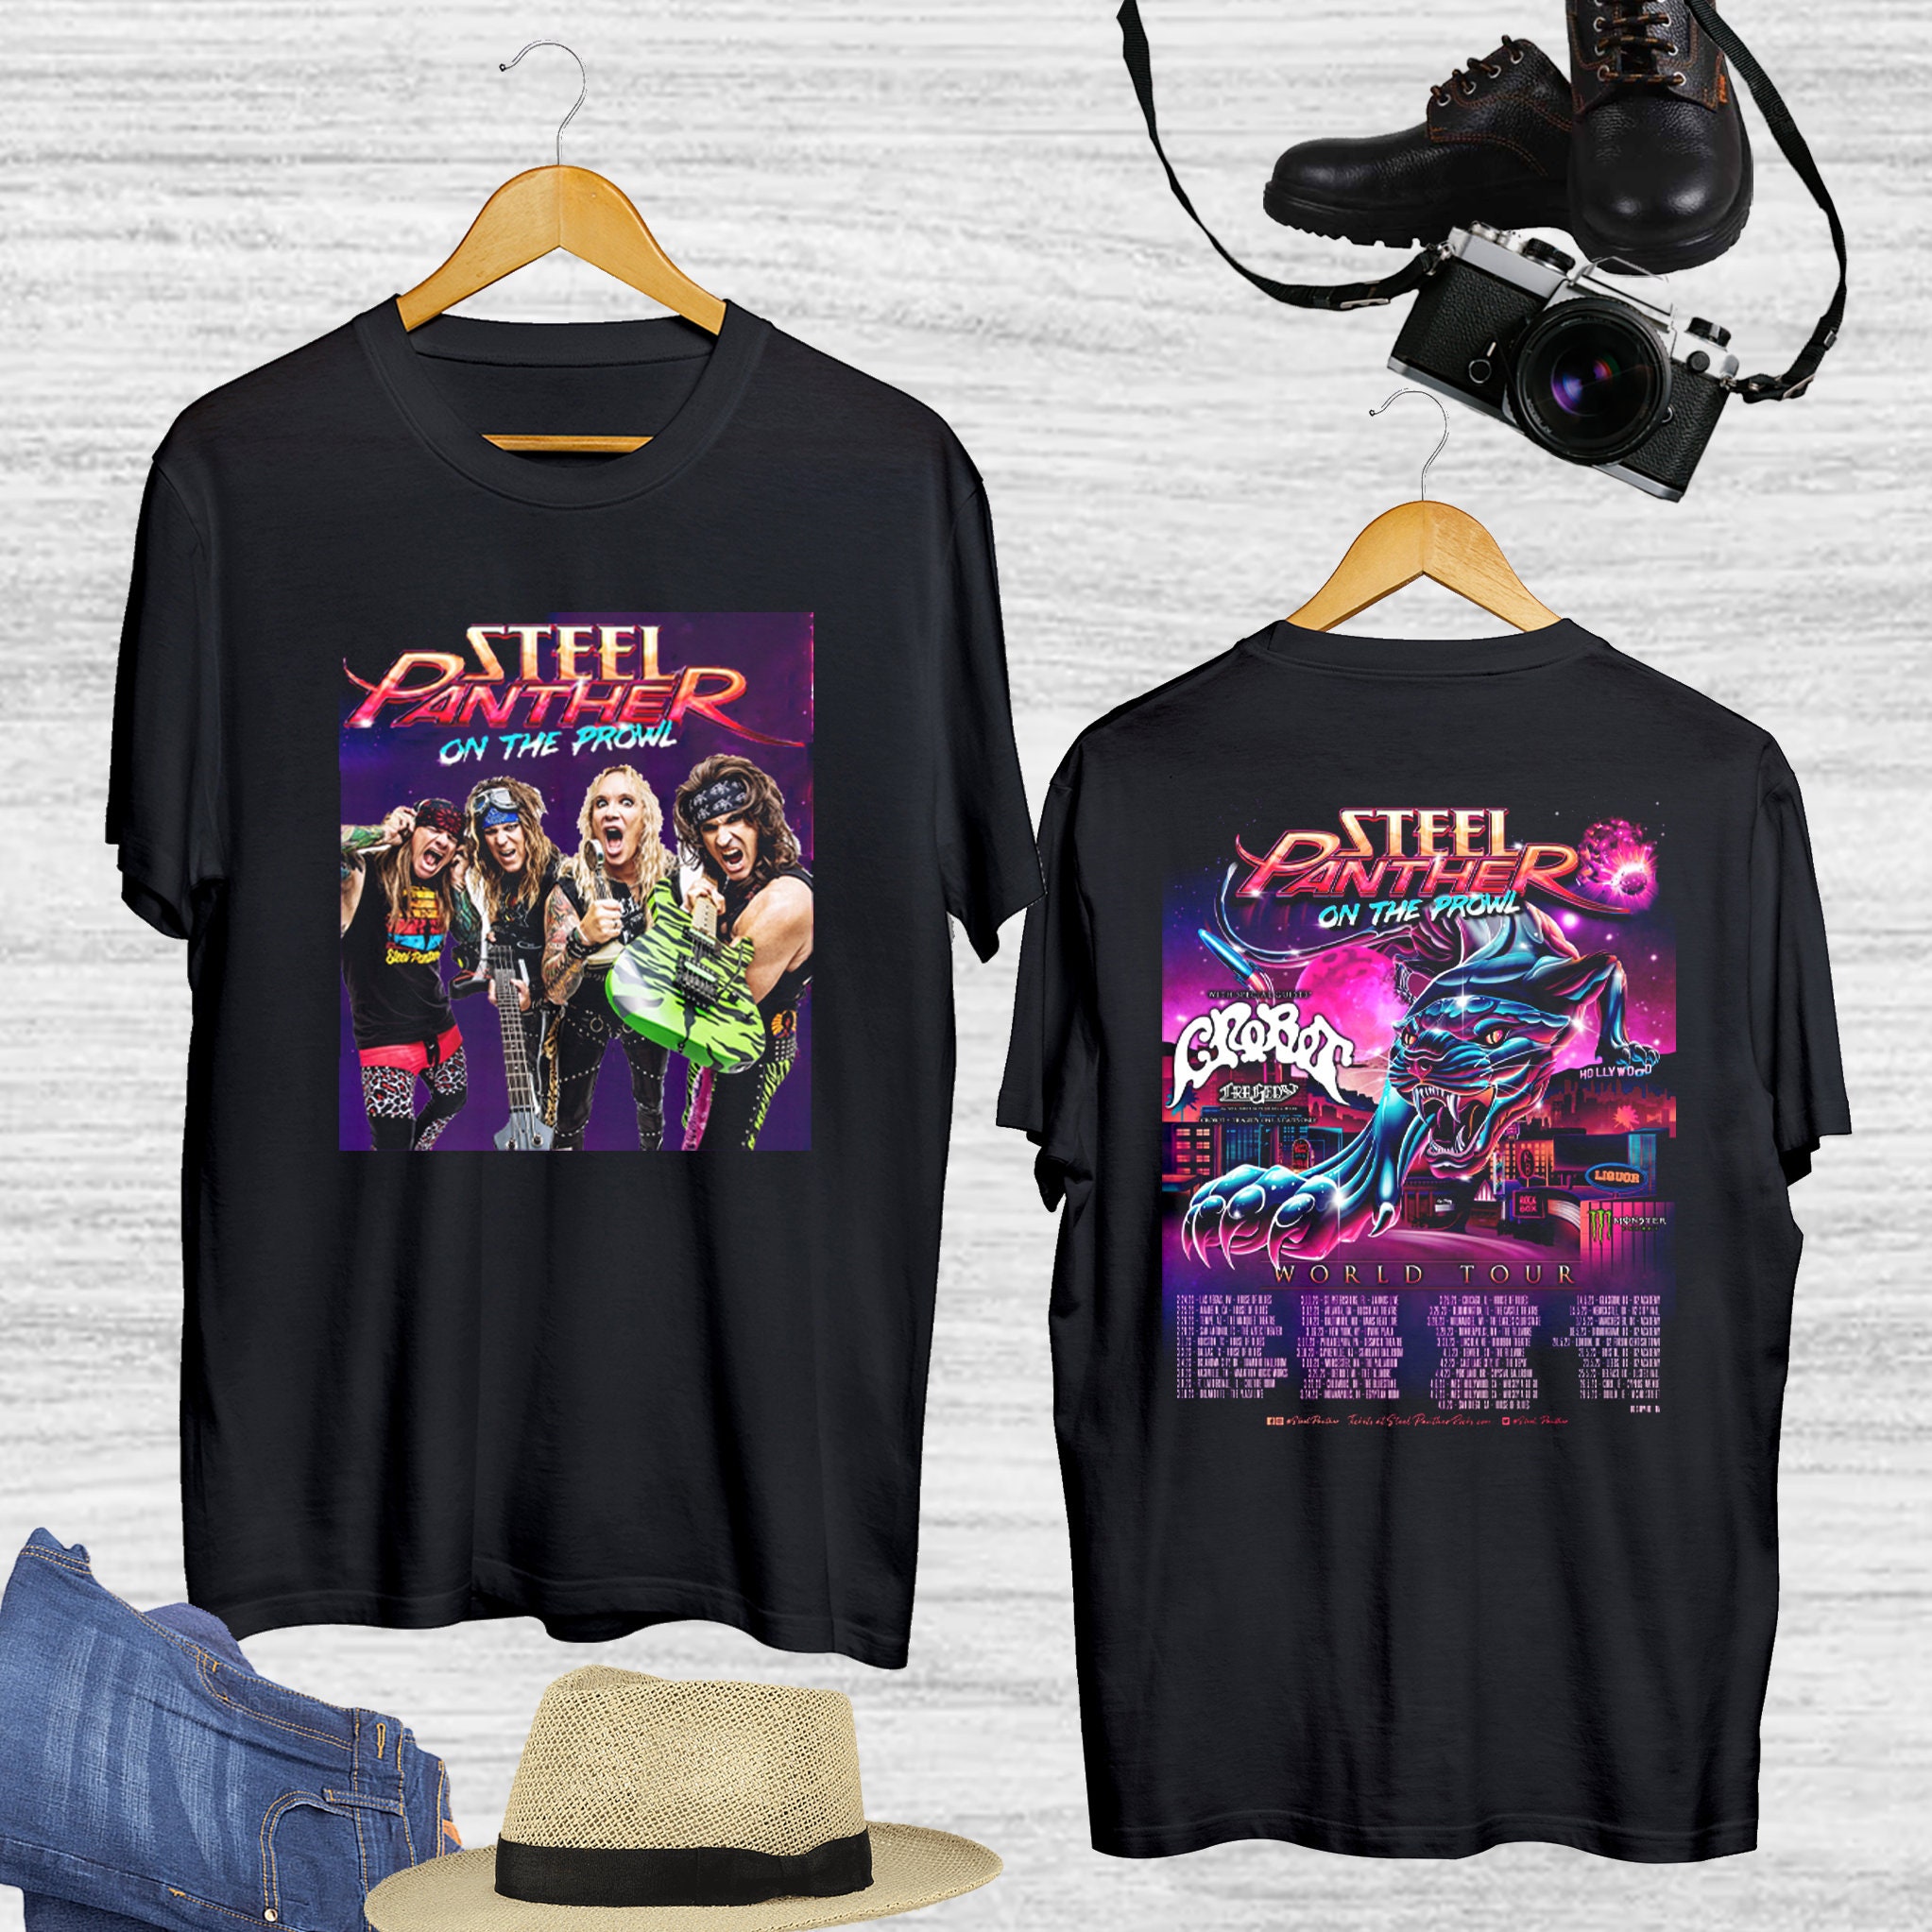 Steel Panther World Tour 2023 T-Shirt, Steel Panther On The Prowl World Tour Shirt